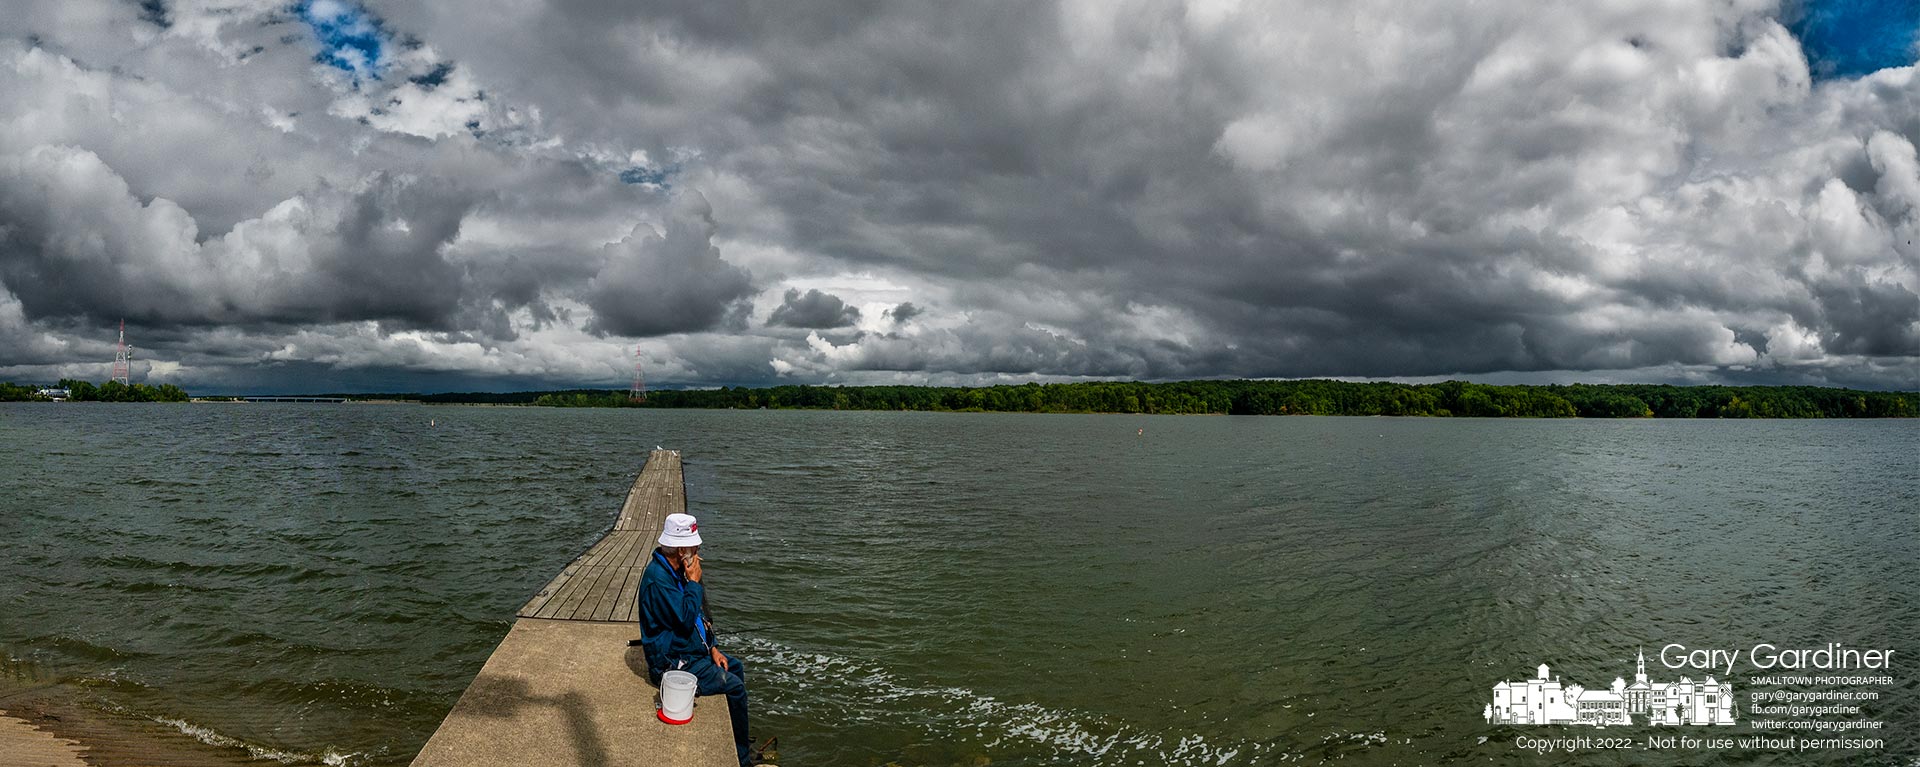 A fisherman smokes a cigarette as he tends to two lines cast from the Walnut Street boat ramp into Hoover Reservoir as storm clouds darken the horizon at the reservoir. My Final Photo for Sept. 6, 2022.